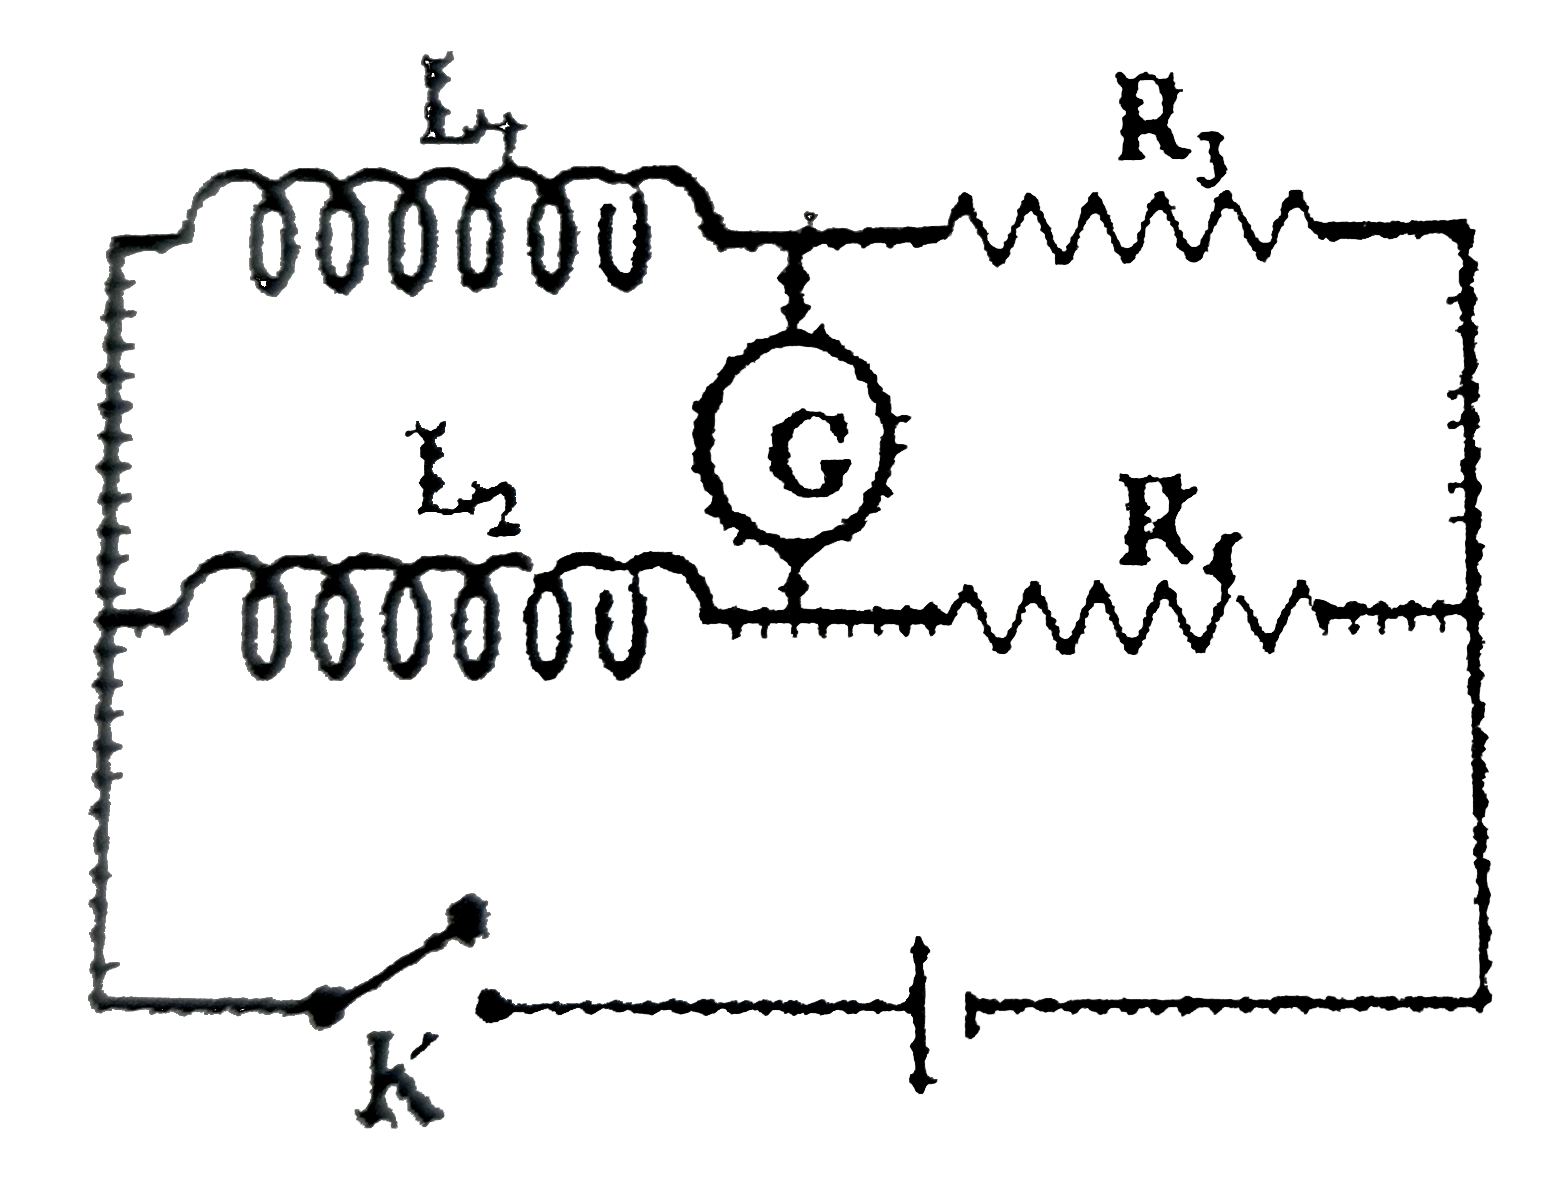 Two inductors of self inductances L(1) and L(2) of reistances R(1) and R(2) (not shown in the diagram) respectively, are connected in the circuit as shown in the figure. At the instant t=0, key K is closed,  obtain the condition for which the galvanometer will show zero deflection at all times after the key is closed.